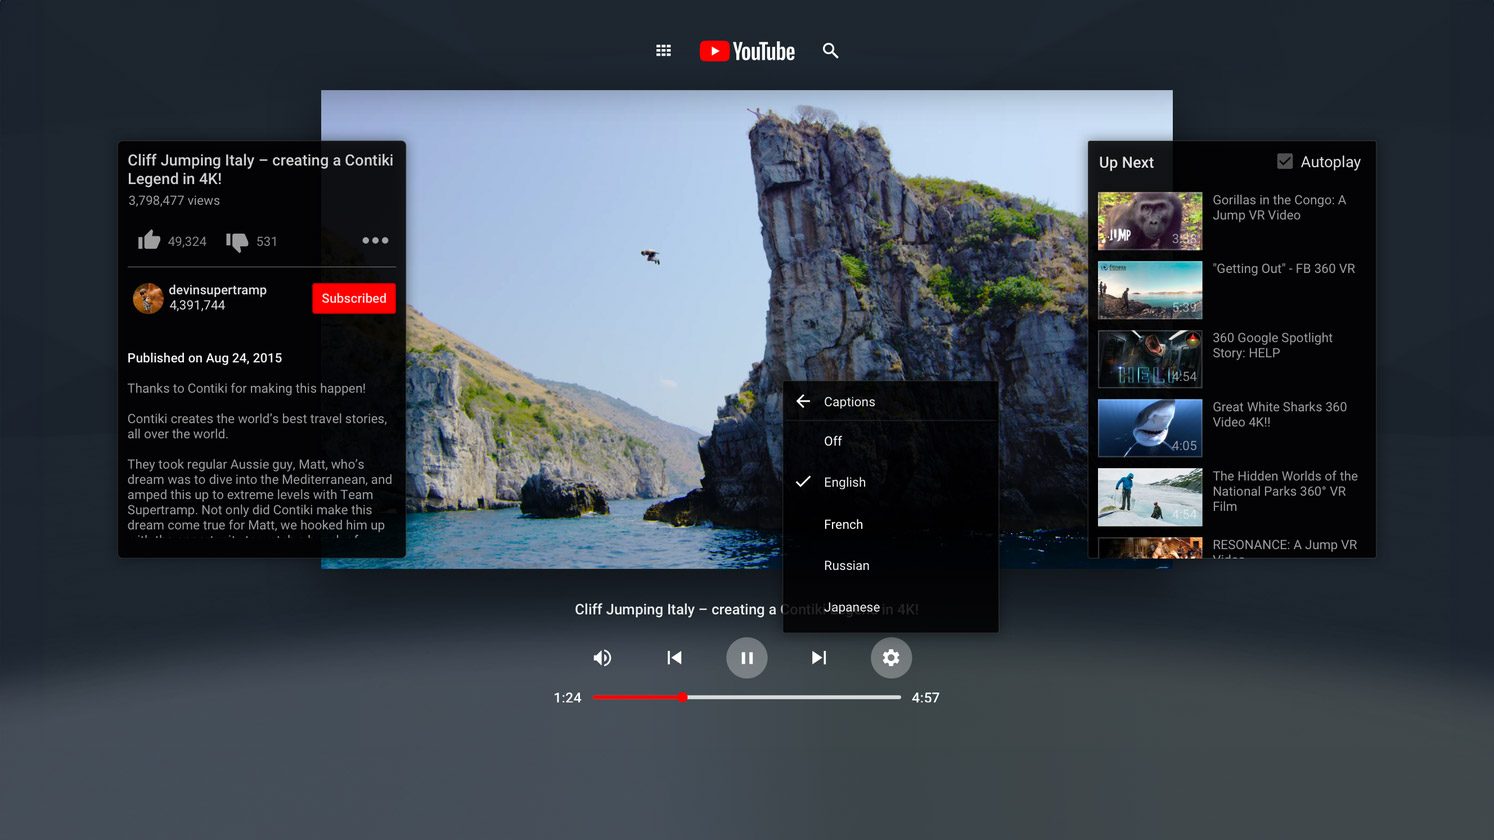 YouTube Is Coming to Vision Pro, but What About Spatial Video?